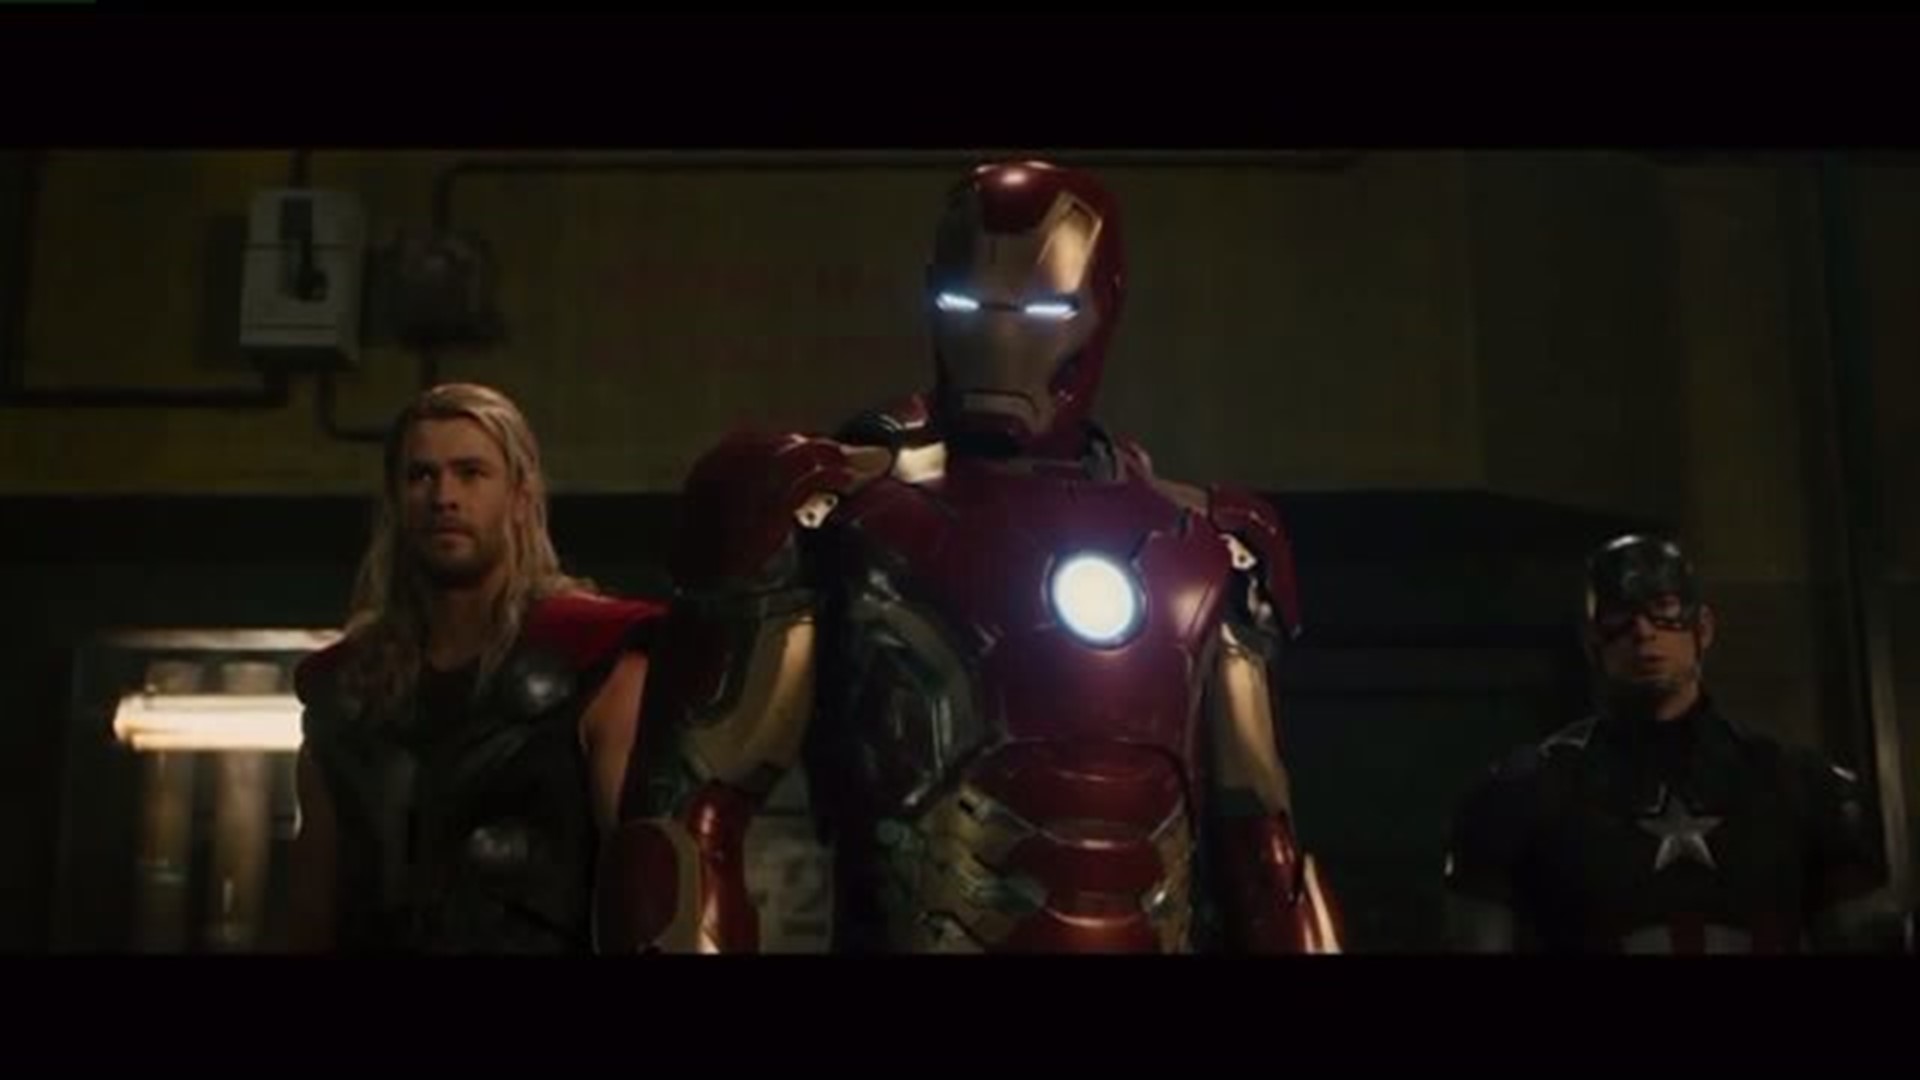 Steve At The Movies- Avengers: Age of Ultron